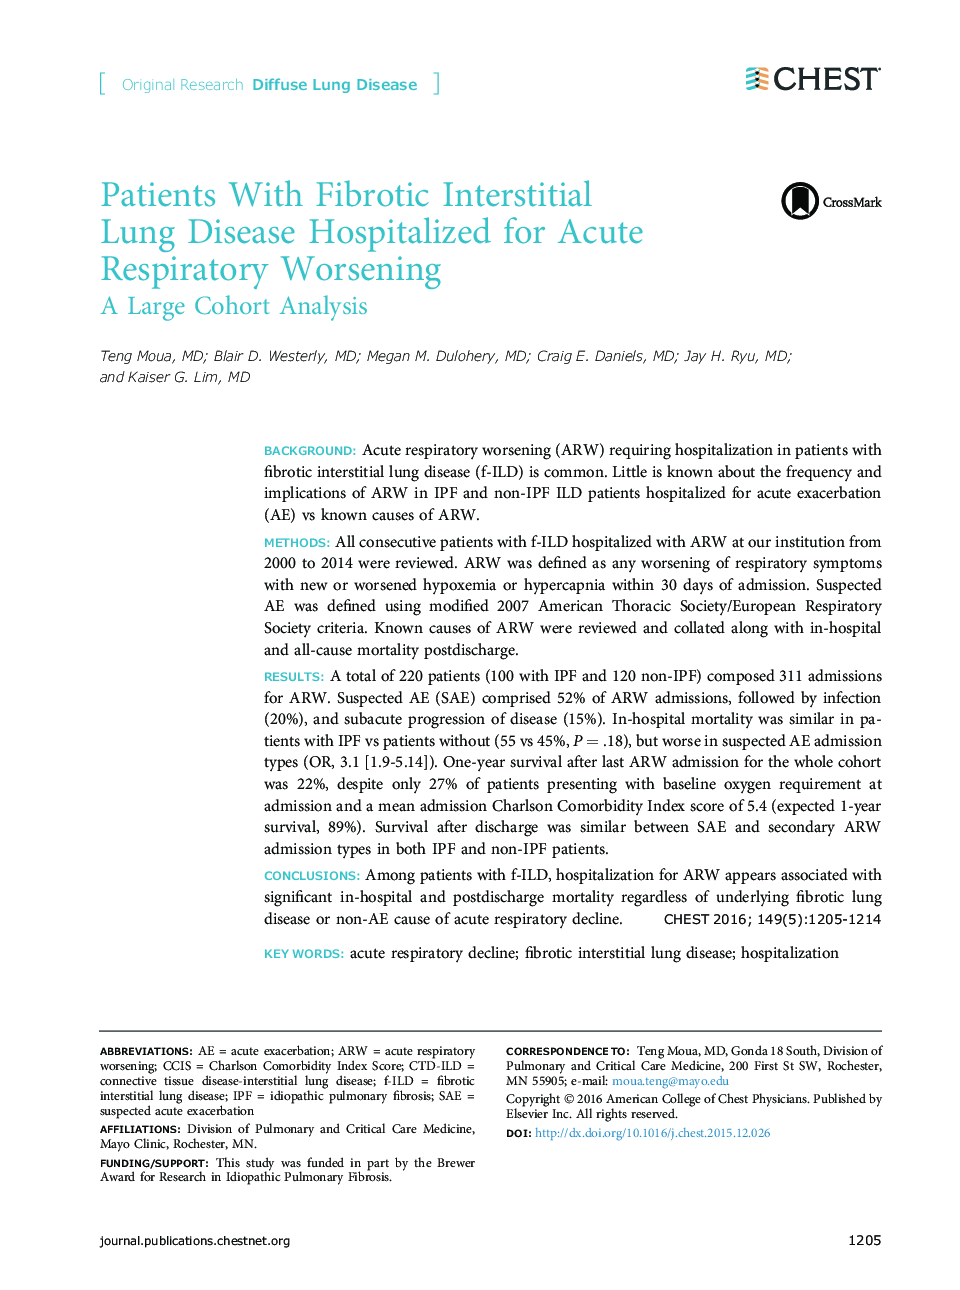 Patients With Fibrotic Interstitial Lung Disease Hospitalized for Acute Respiratory Worsening : A Large Cohort Analysis